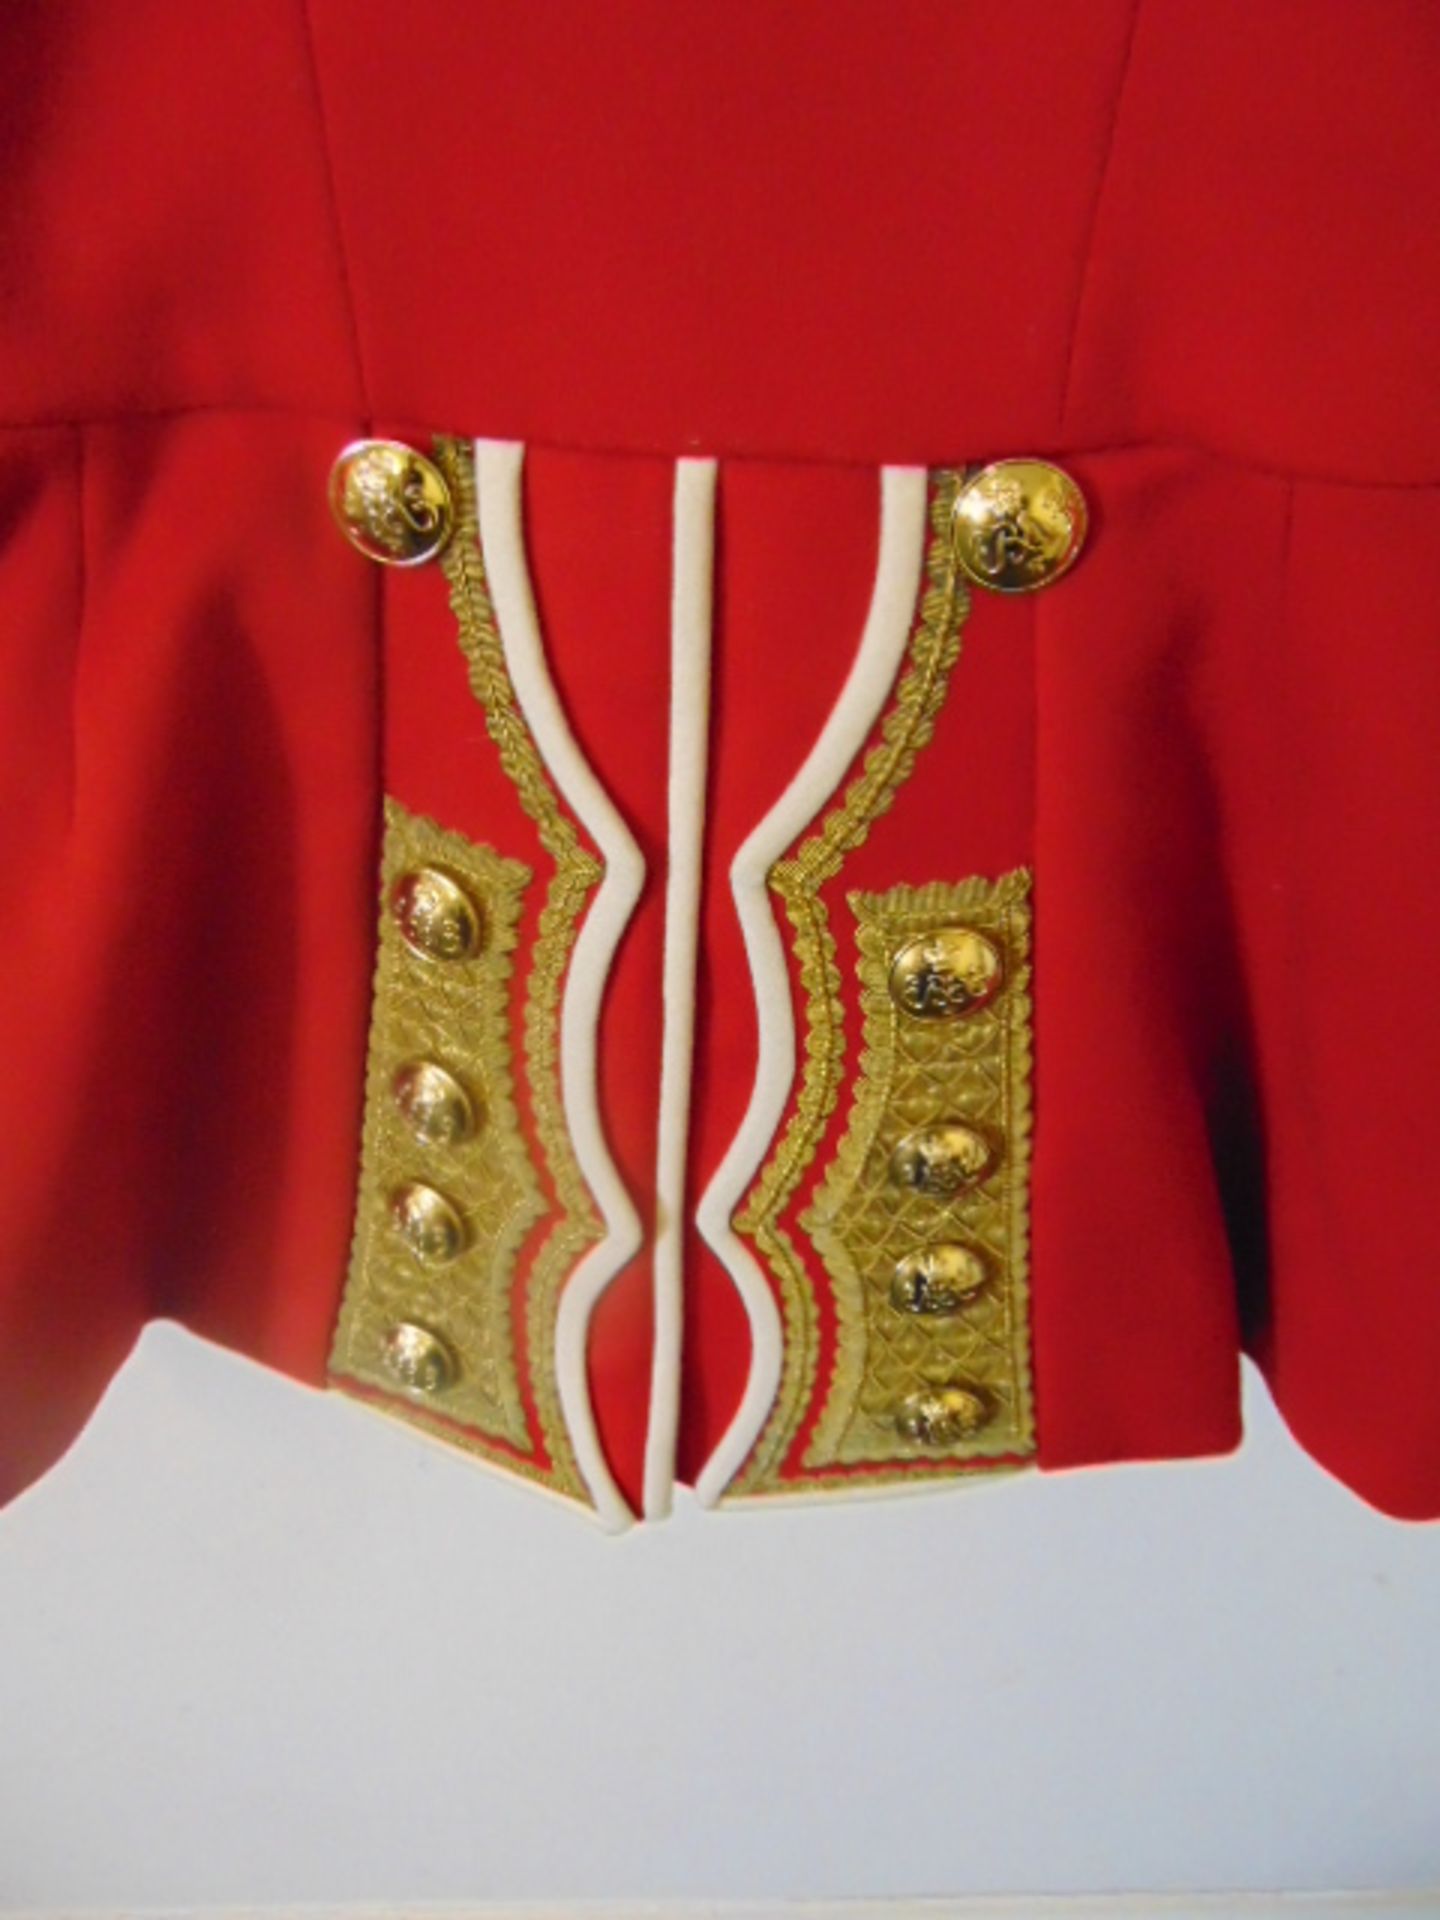 British Army Grenadier Guards Officers Ceremonial Tunic - Image 8 of 11